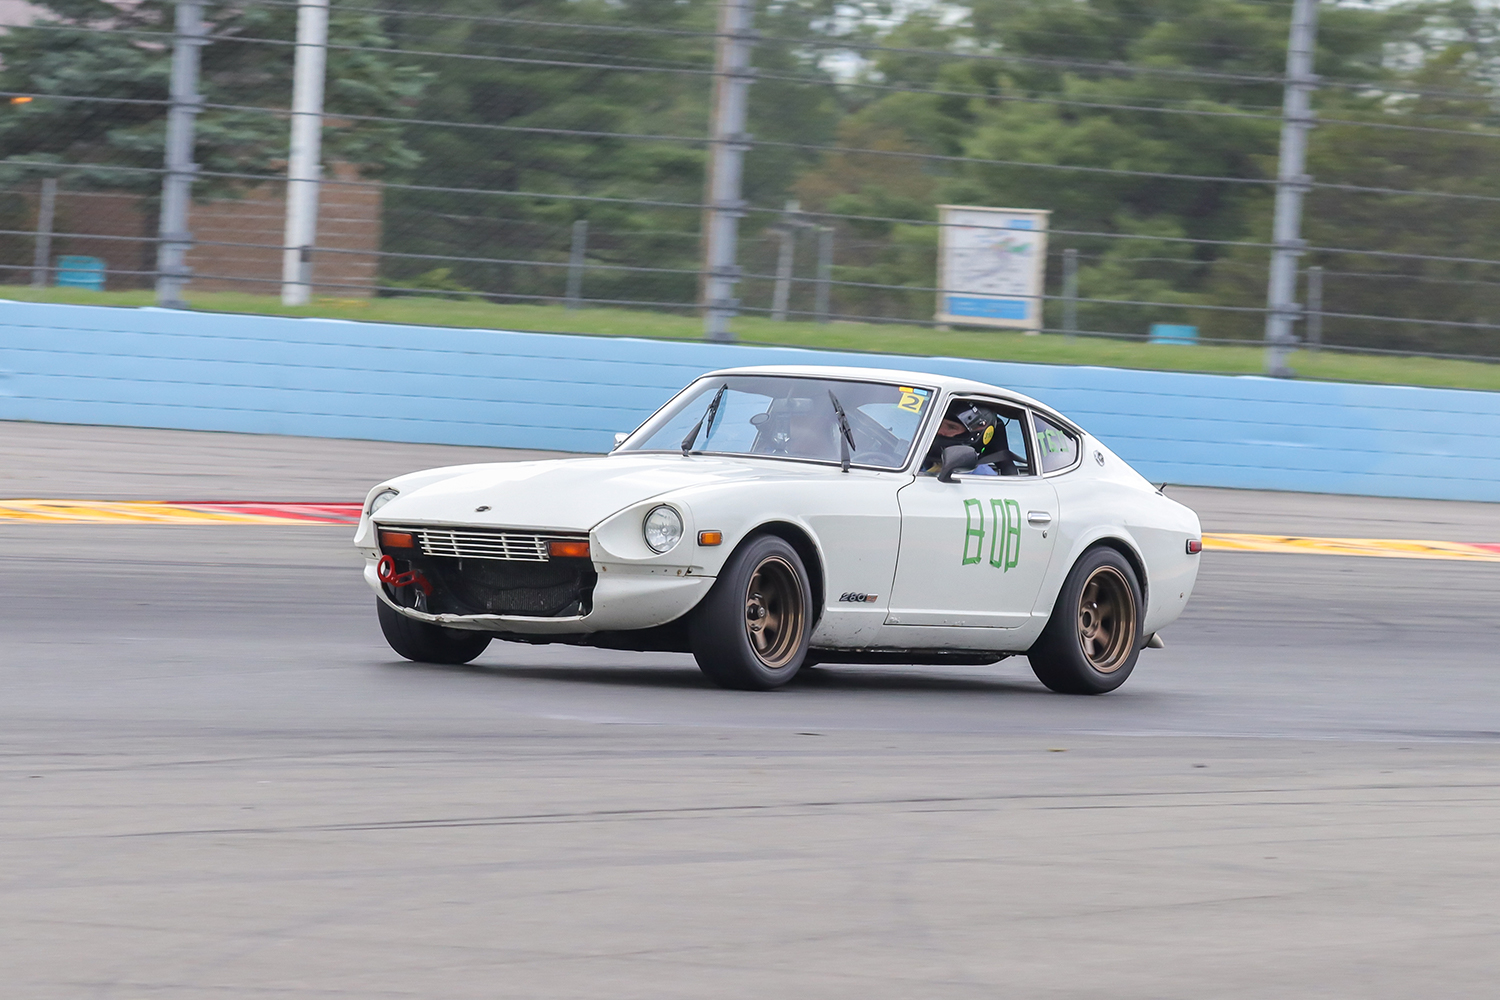 Automotive writer Benjamin Hunting drives his 1978 Datsun 280Z on the road course at Watkins Glen